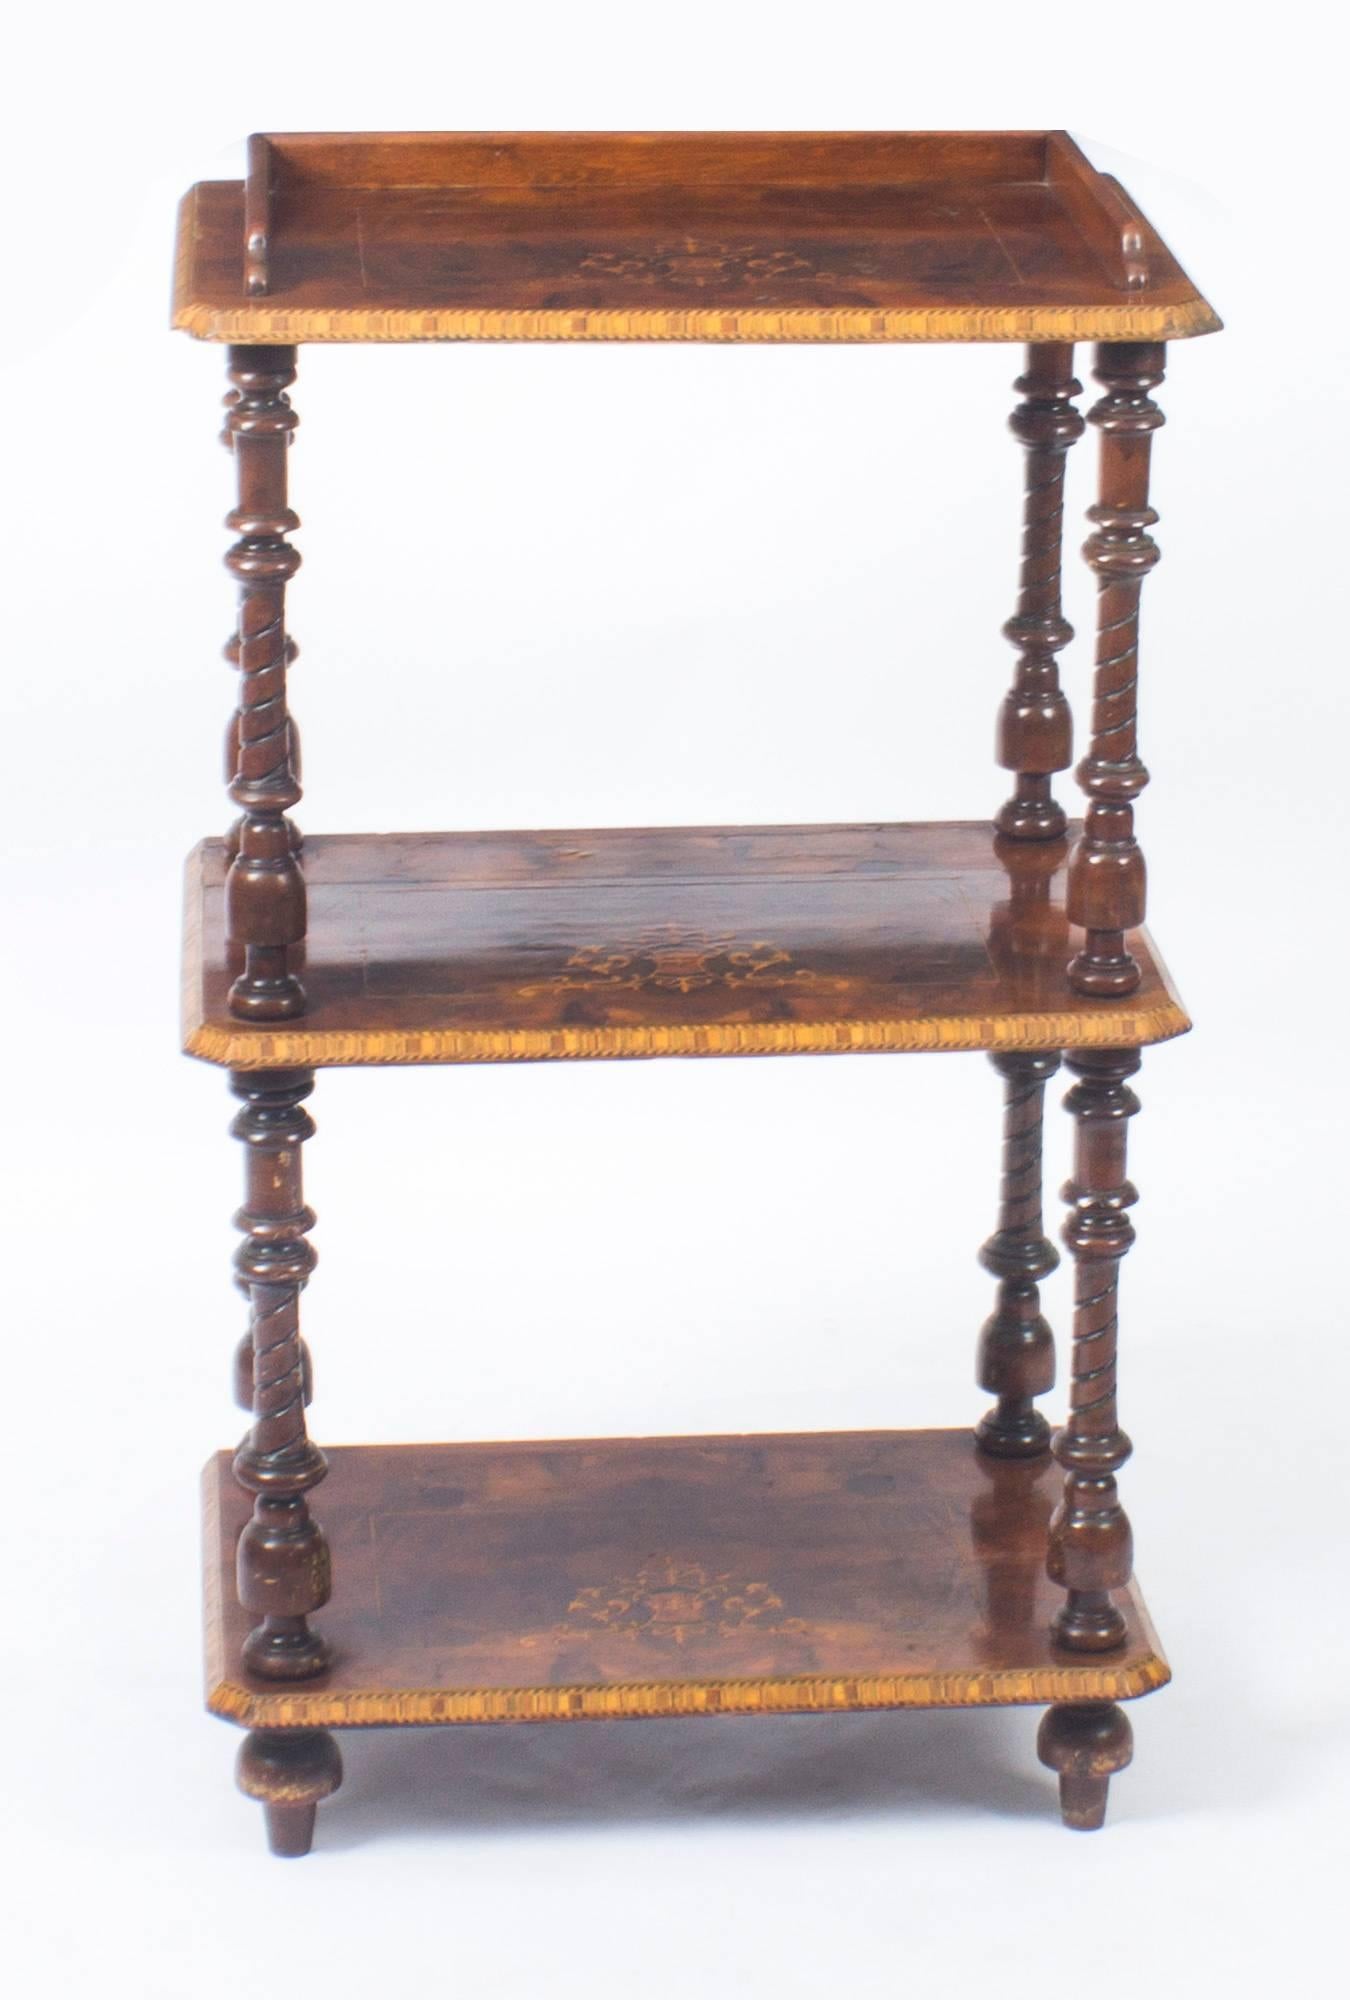 There is no mistaking the unique quality and elegant design of this Victorian whatnot, circa 1880 in date.

This piece of furniture is extremely versatile and can be placed in your living room, office, reception, or dining room.

The design of